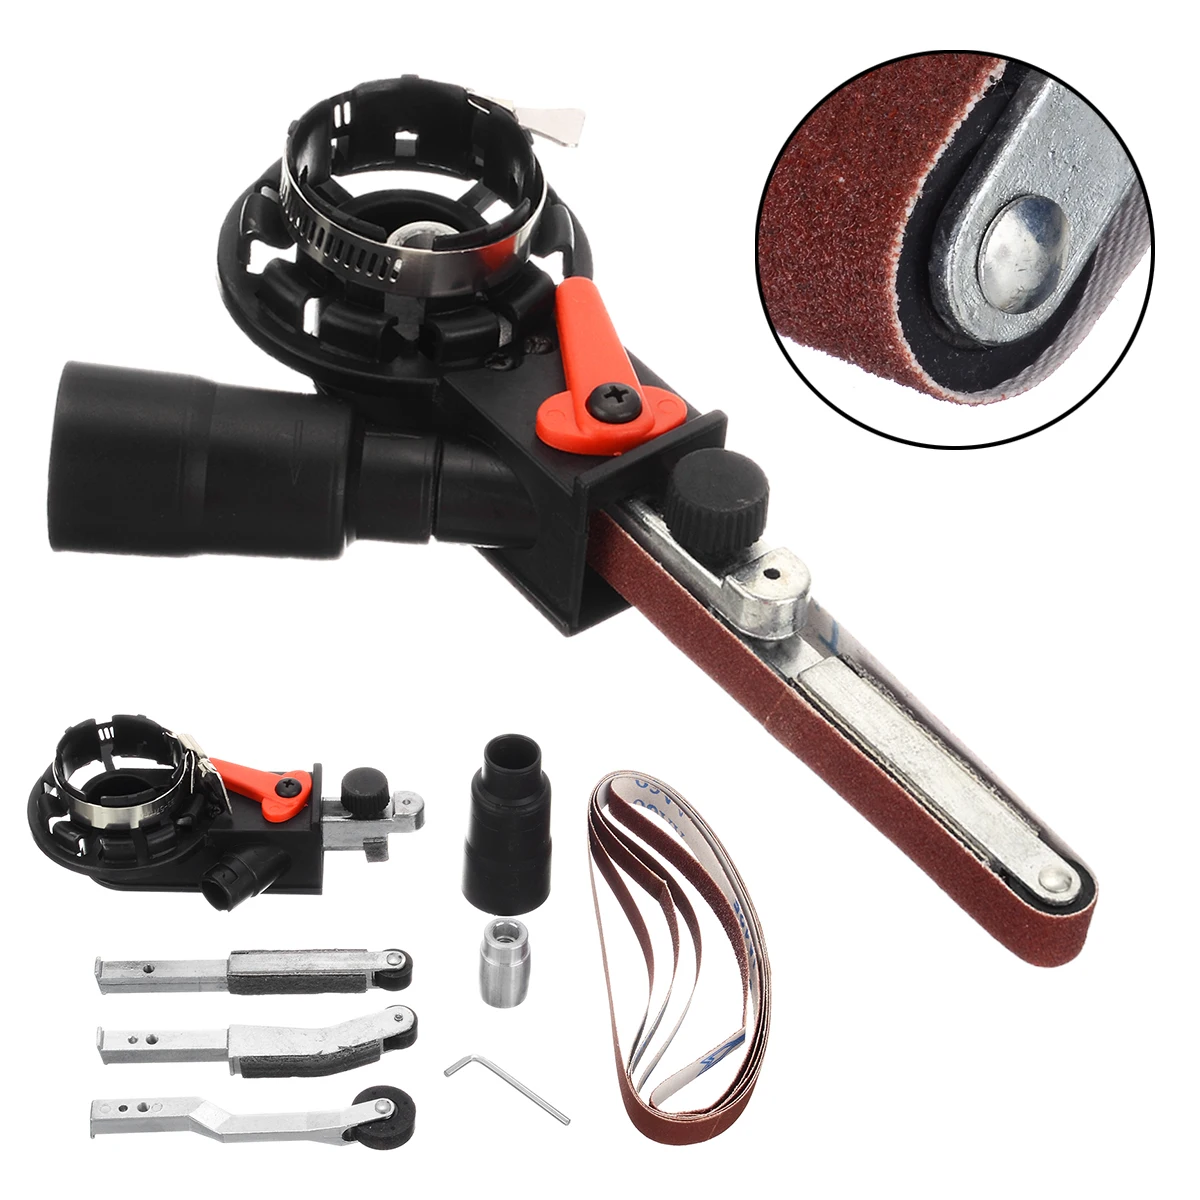 Heavy Duty Sanding Belt Sander Adapter Attachment Kit For Electric Angle Grinder 